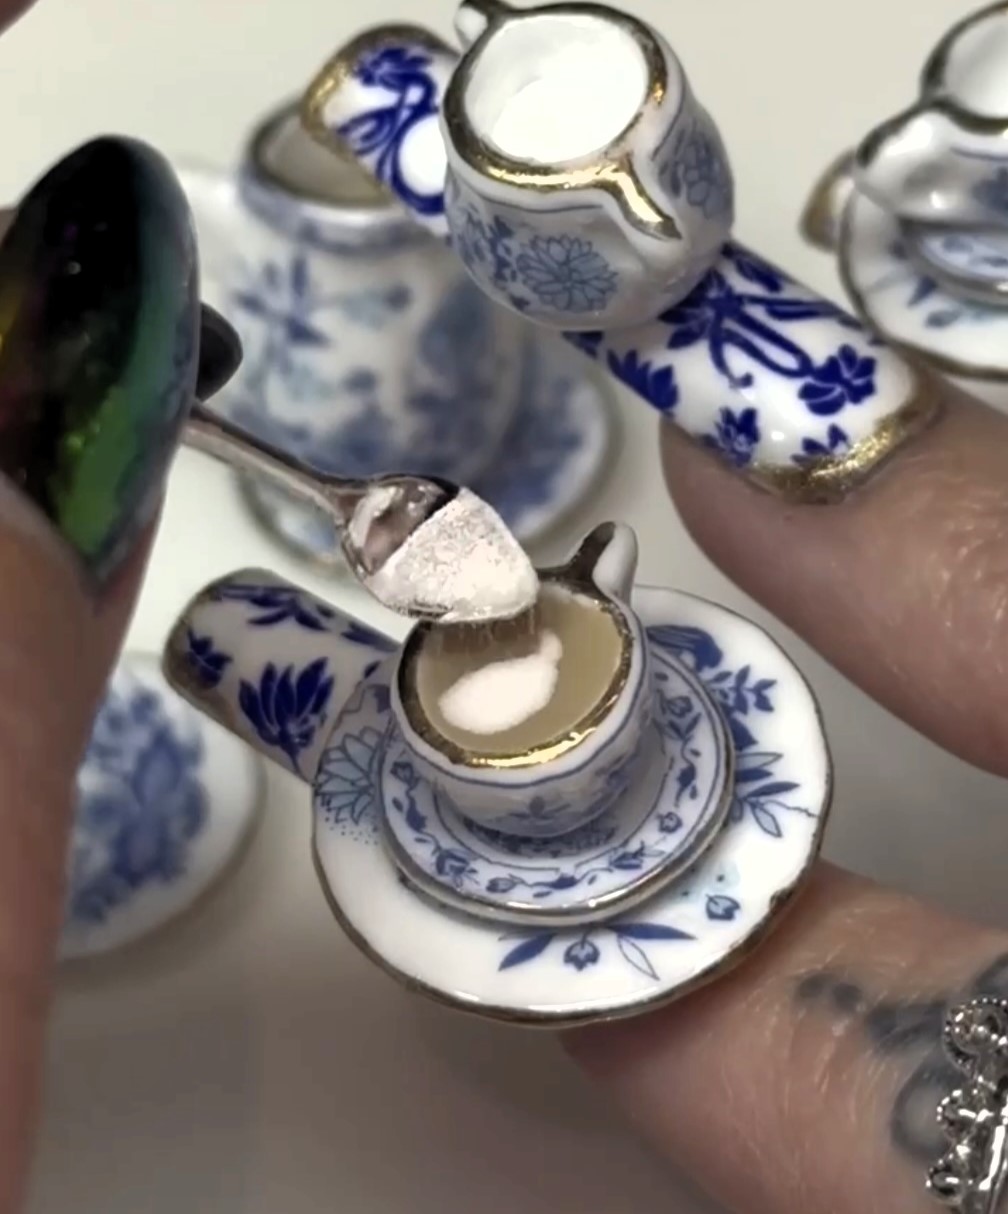 Social media users are stunned by a woman's bizarre manicure that doubles as a tea-brewing set. The unique creation, crafted by nail technician Morgan Gilbertson, has garnered massive attention, sparking both awe and confusion online.